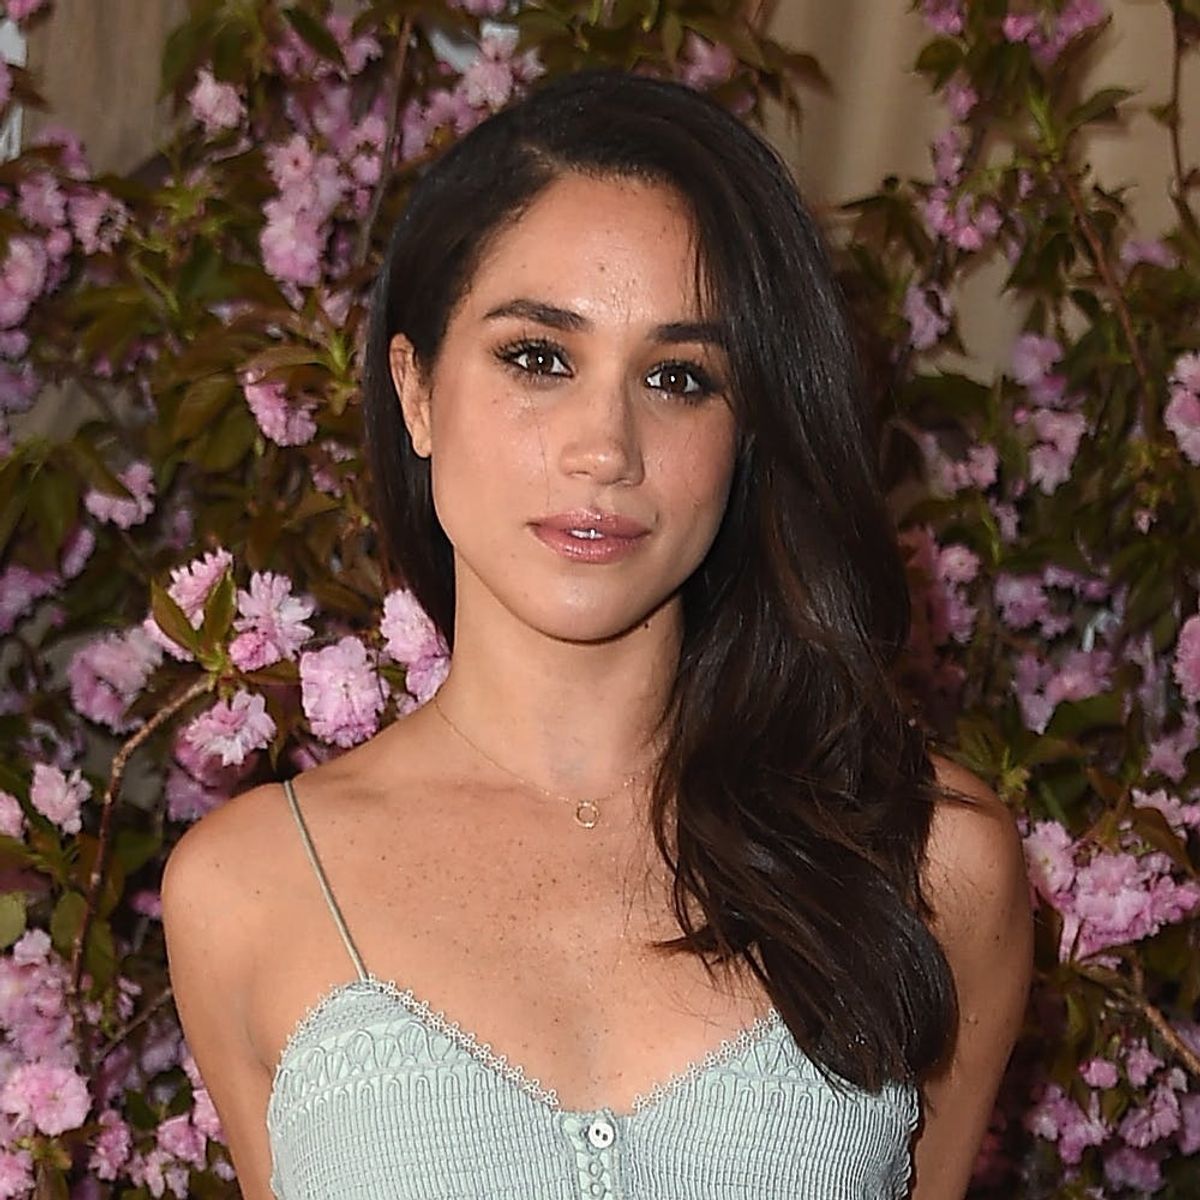 Meghan Markle’s Blog Update Could Mean an Engagement Is Around the Corner